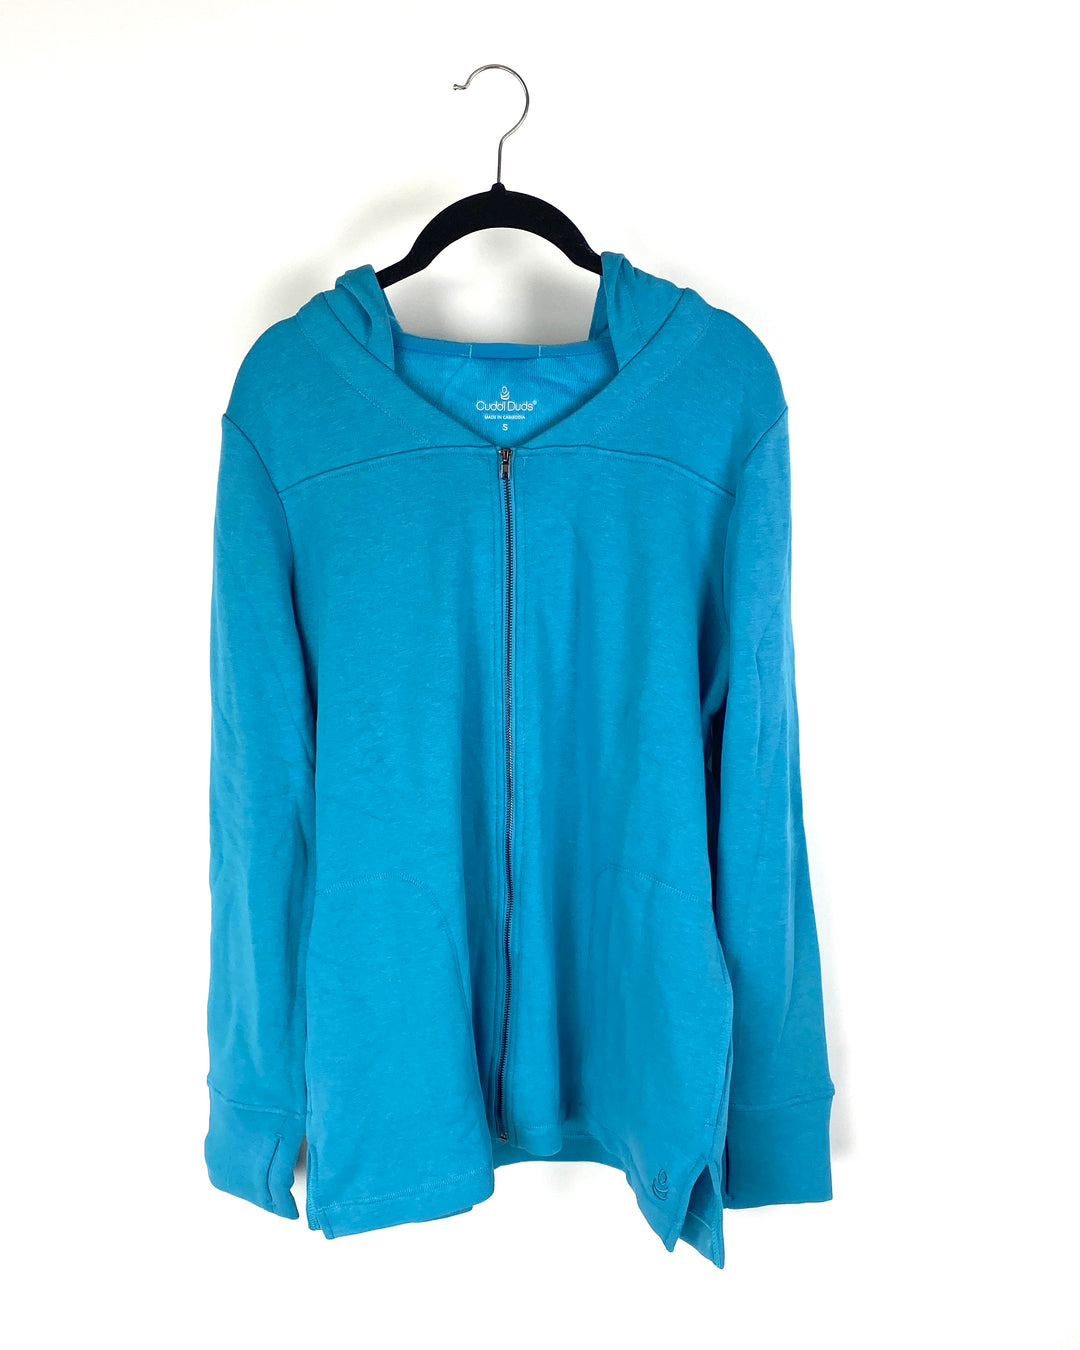 Turquoise Zip Up Jacket - Extra Small and Small